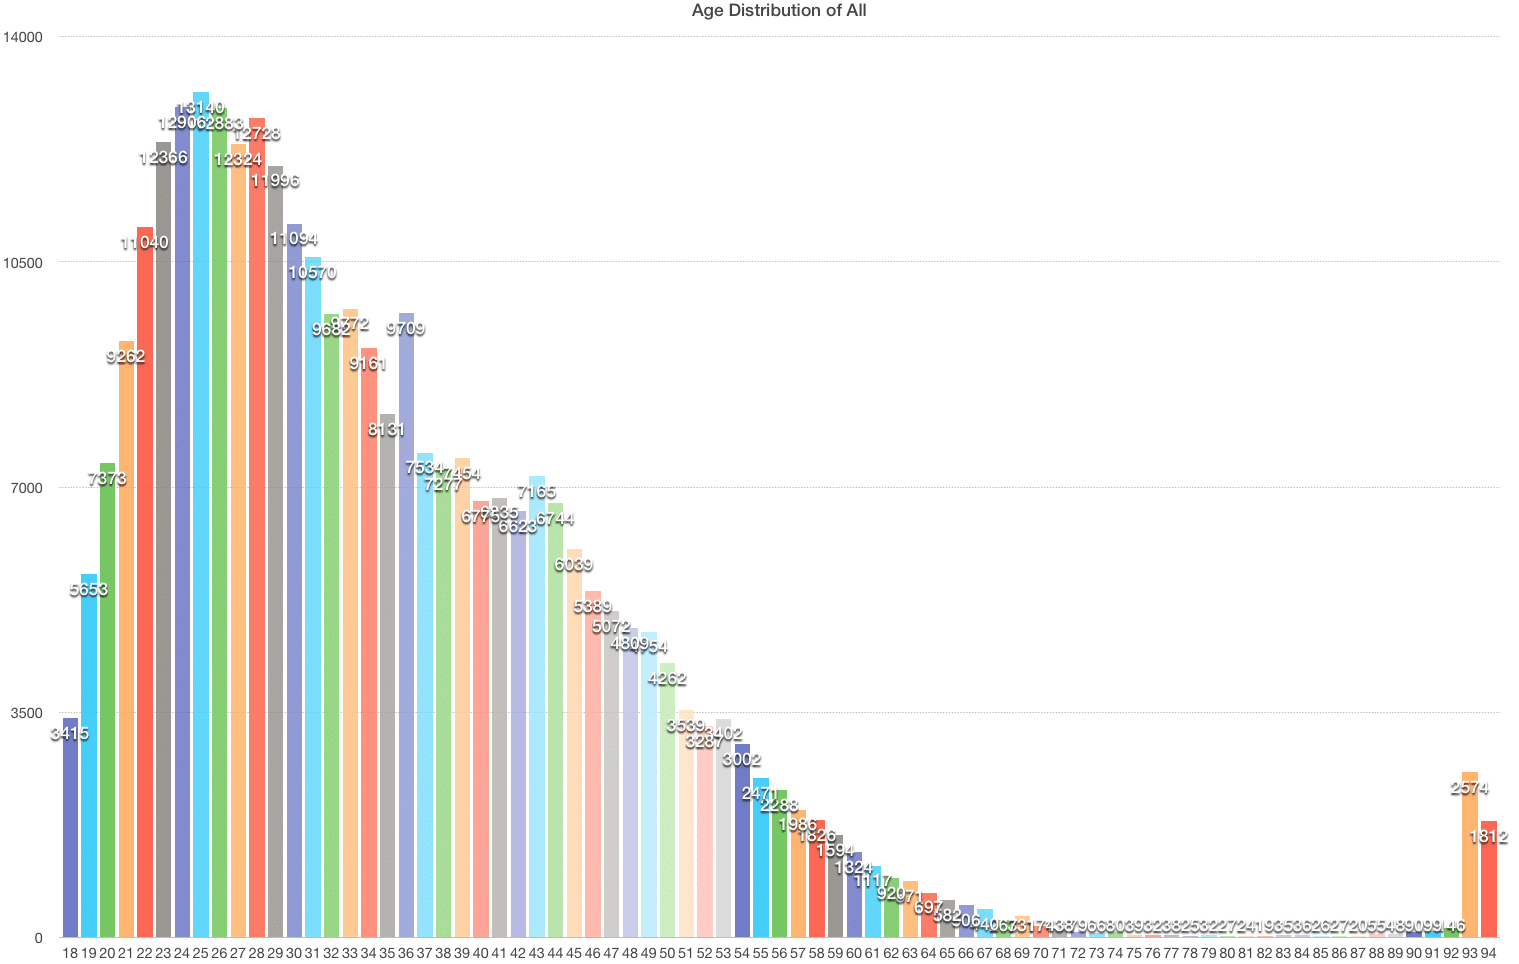 fetlife users by age distribution